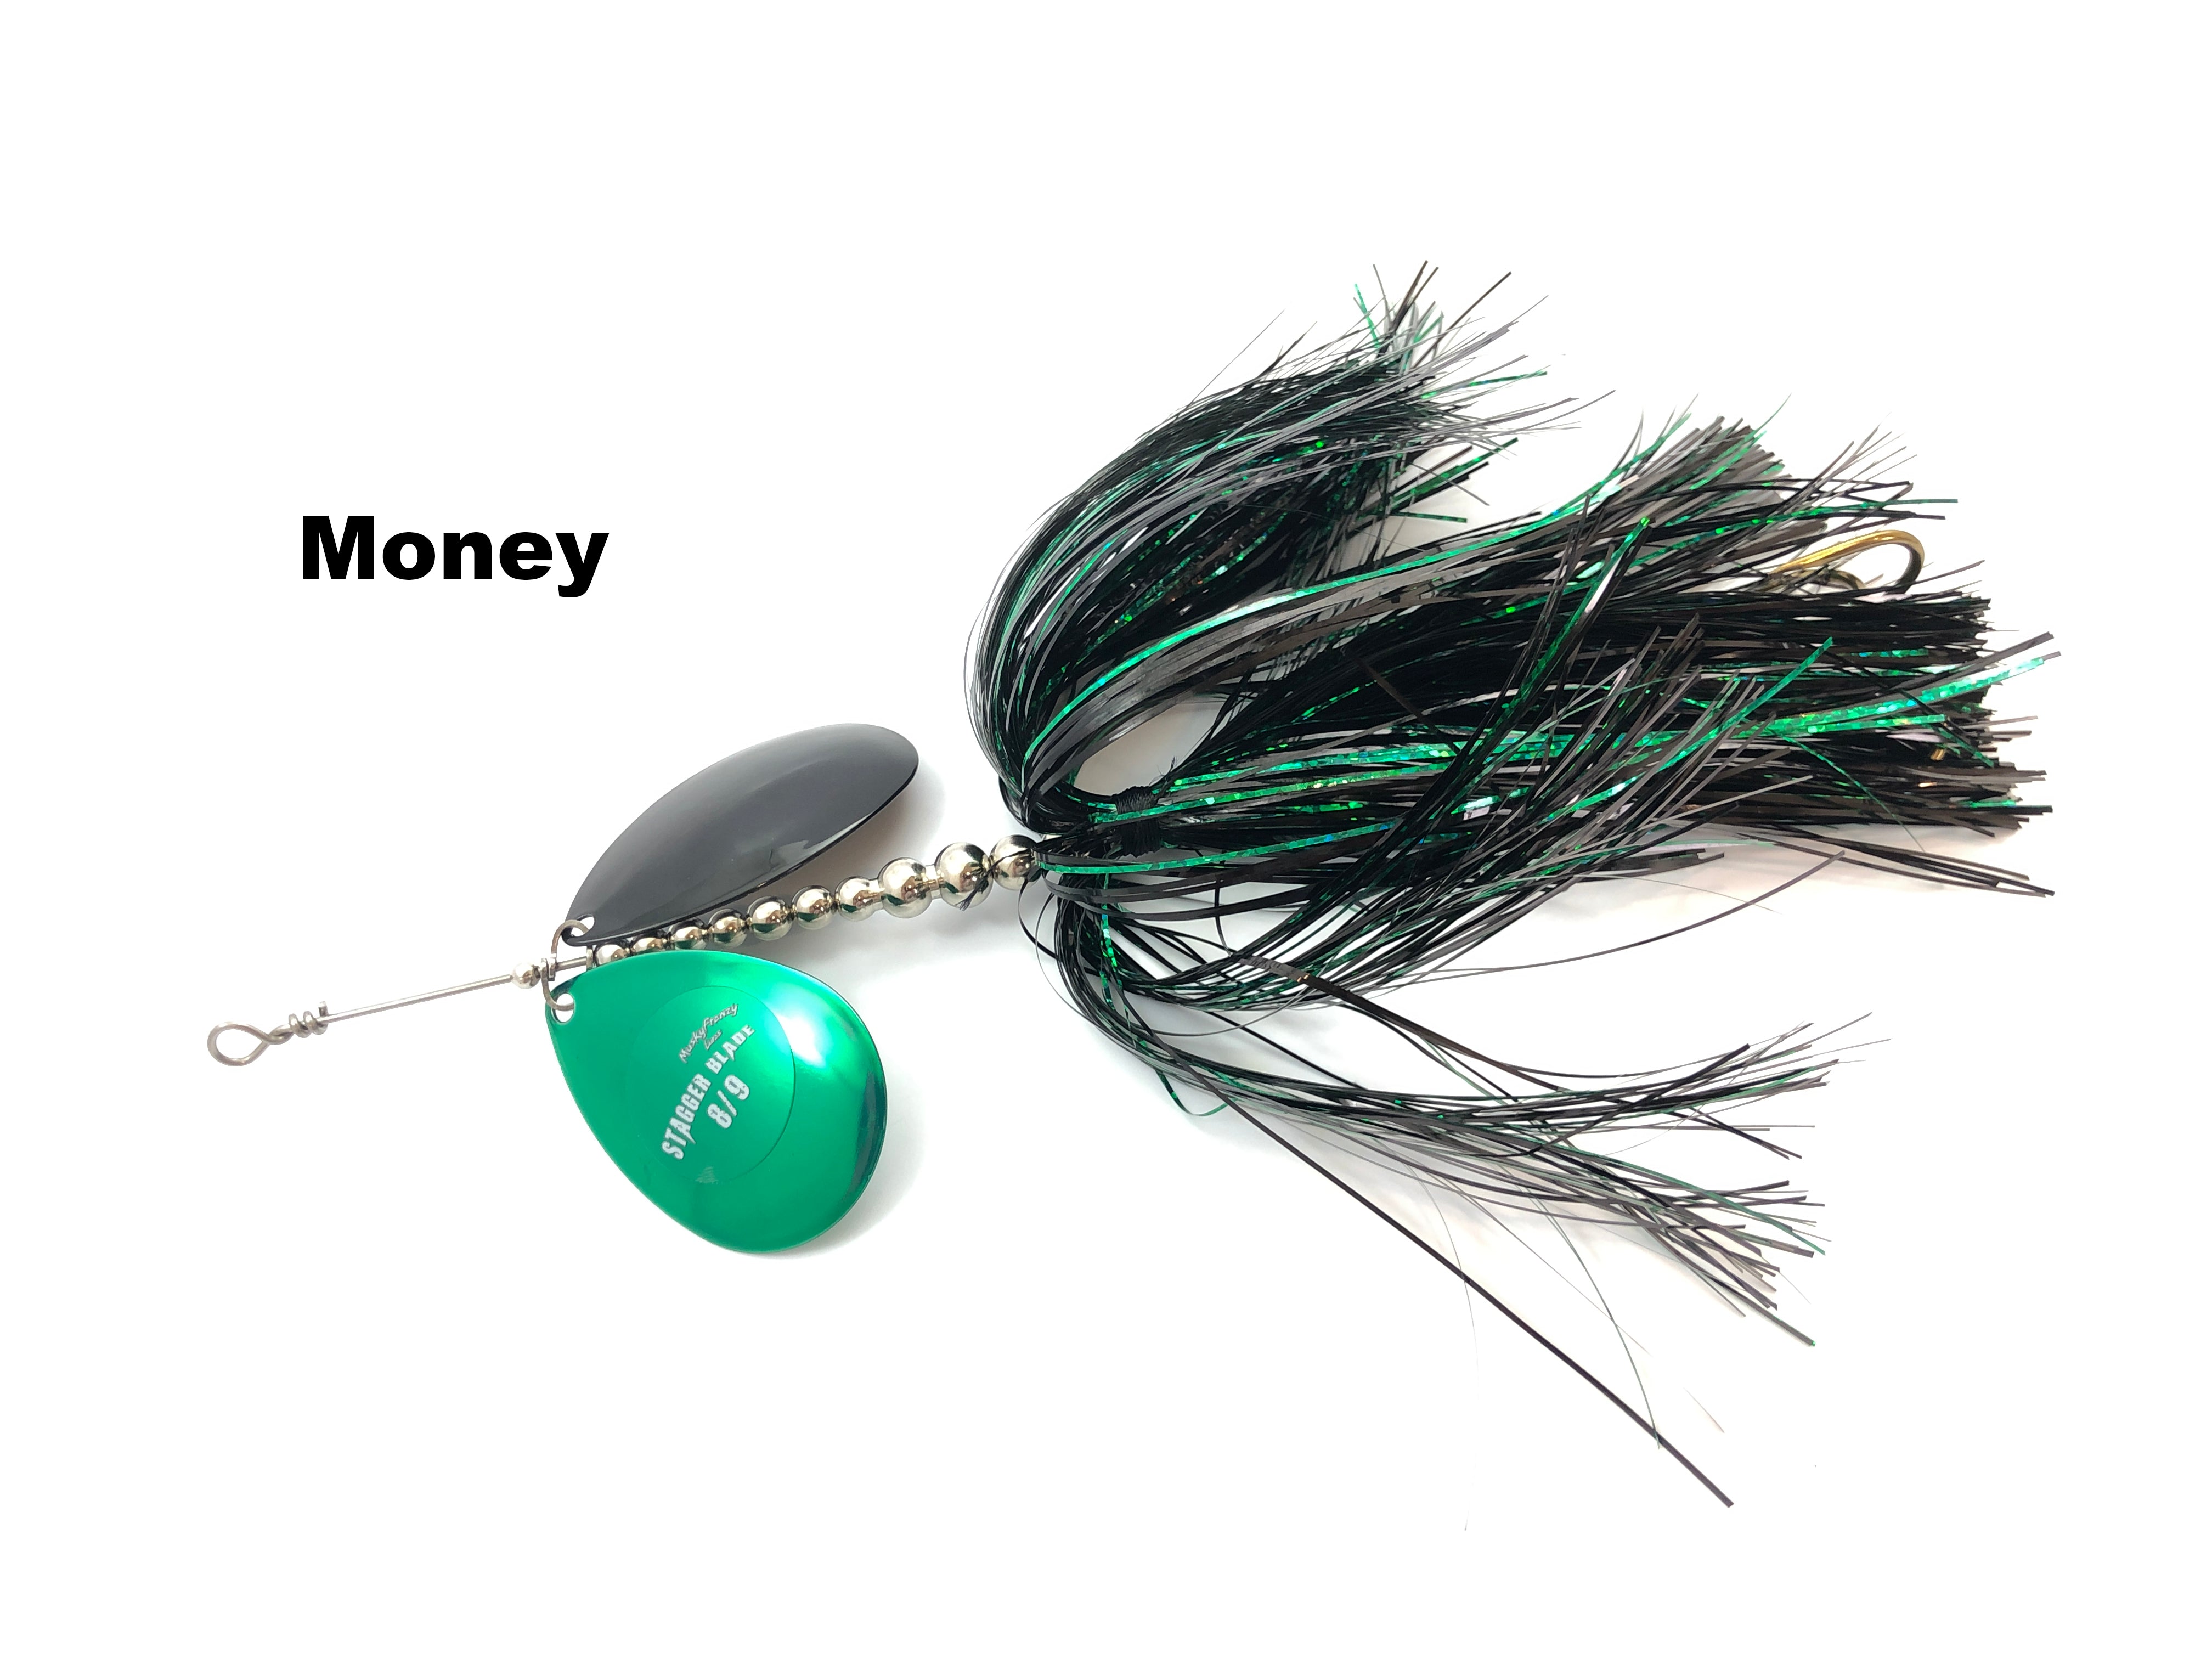 Bucktails – tagged Stagger Blade Musky Lure – Team Rhino Outdoors LLC